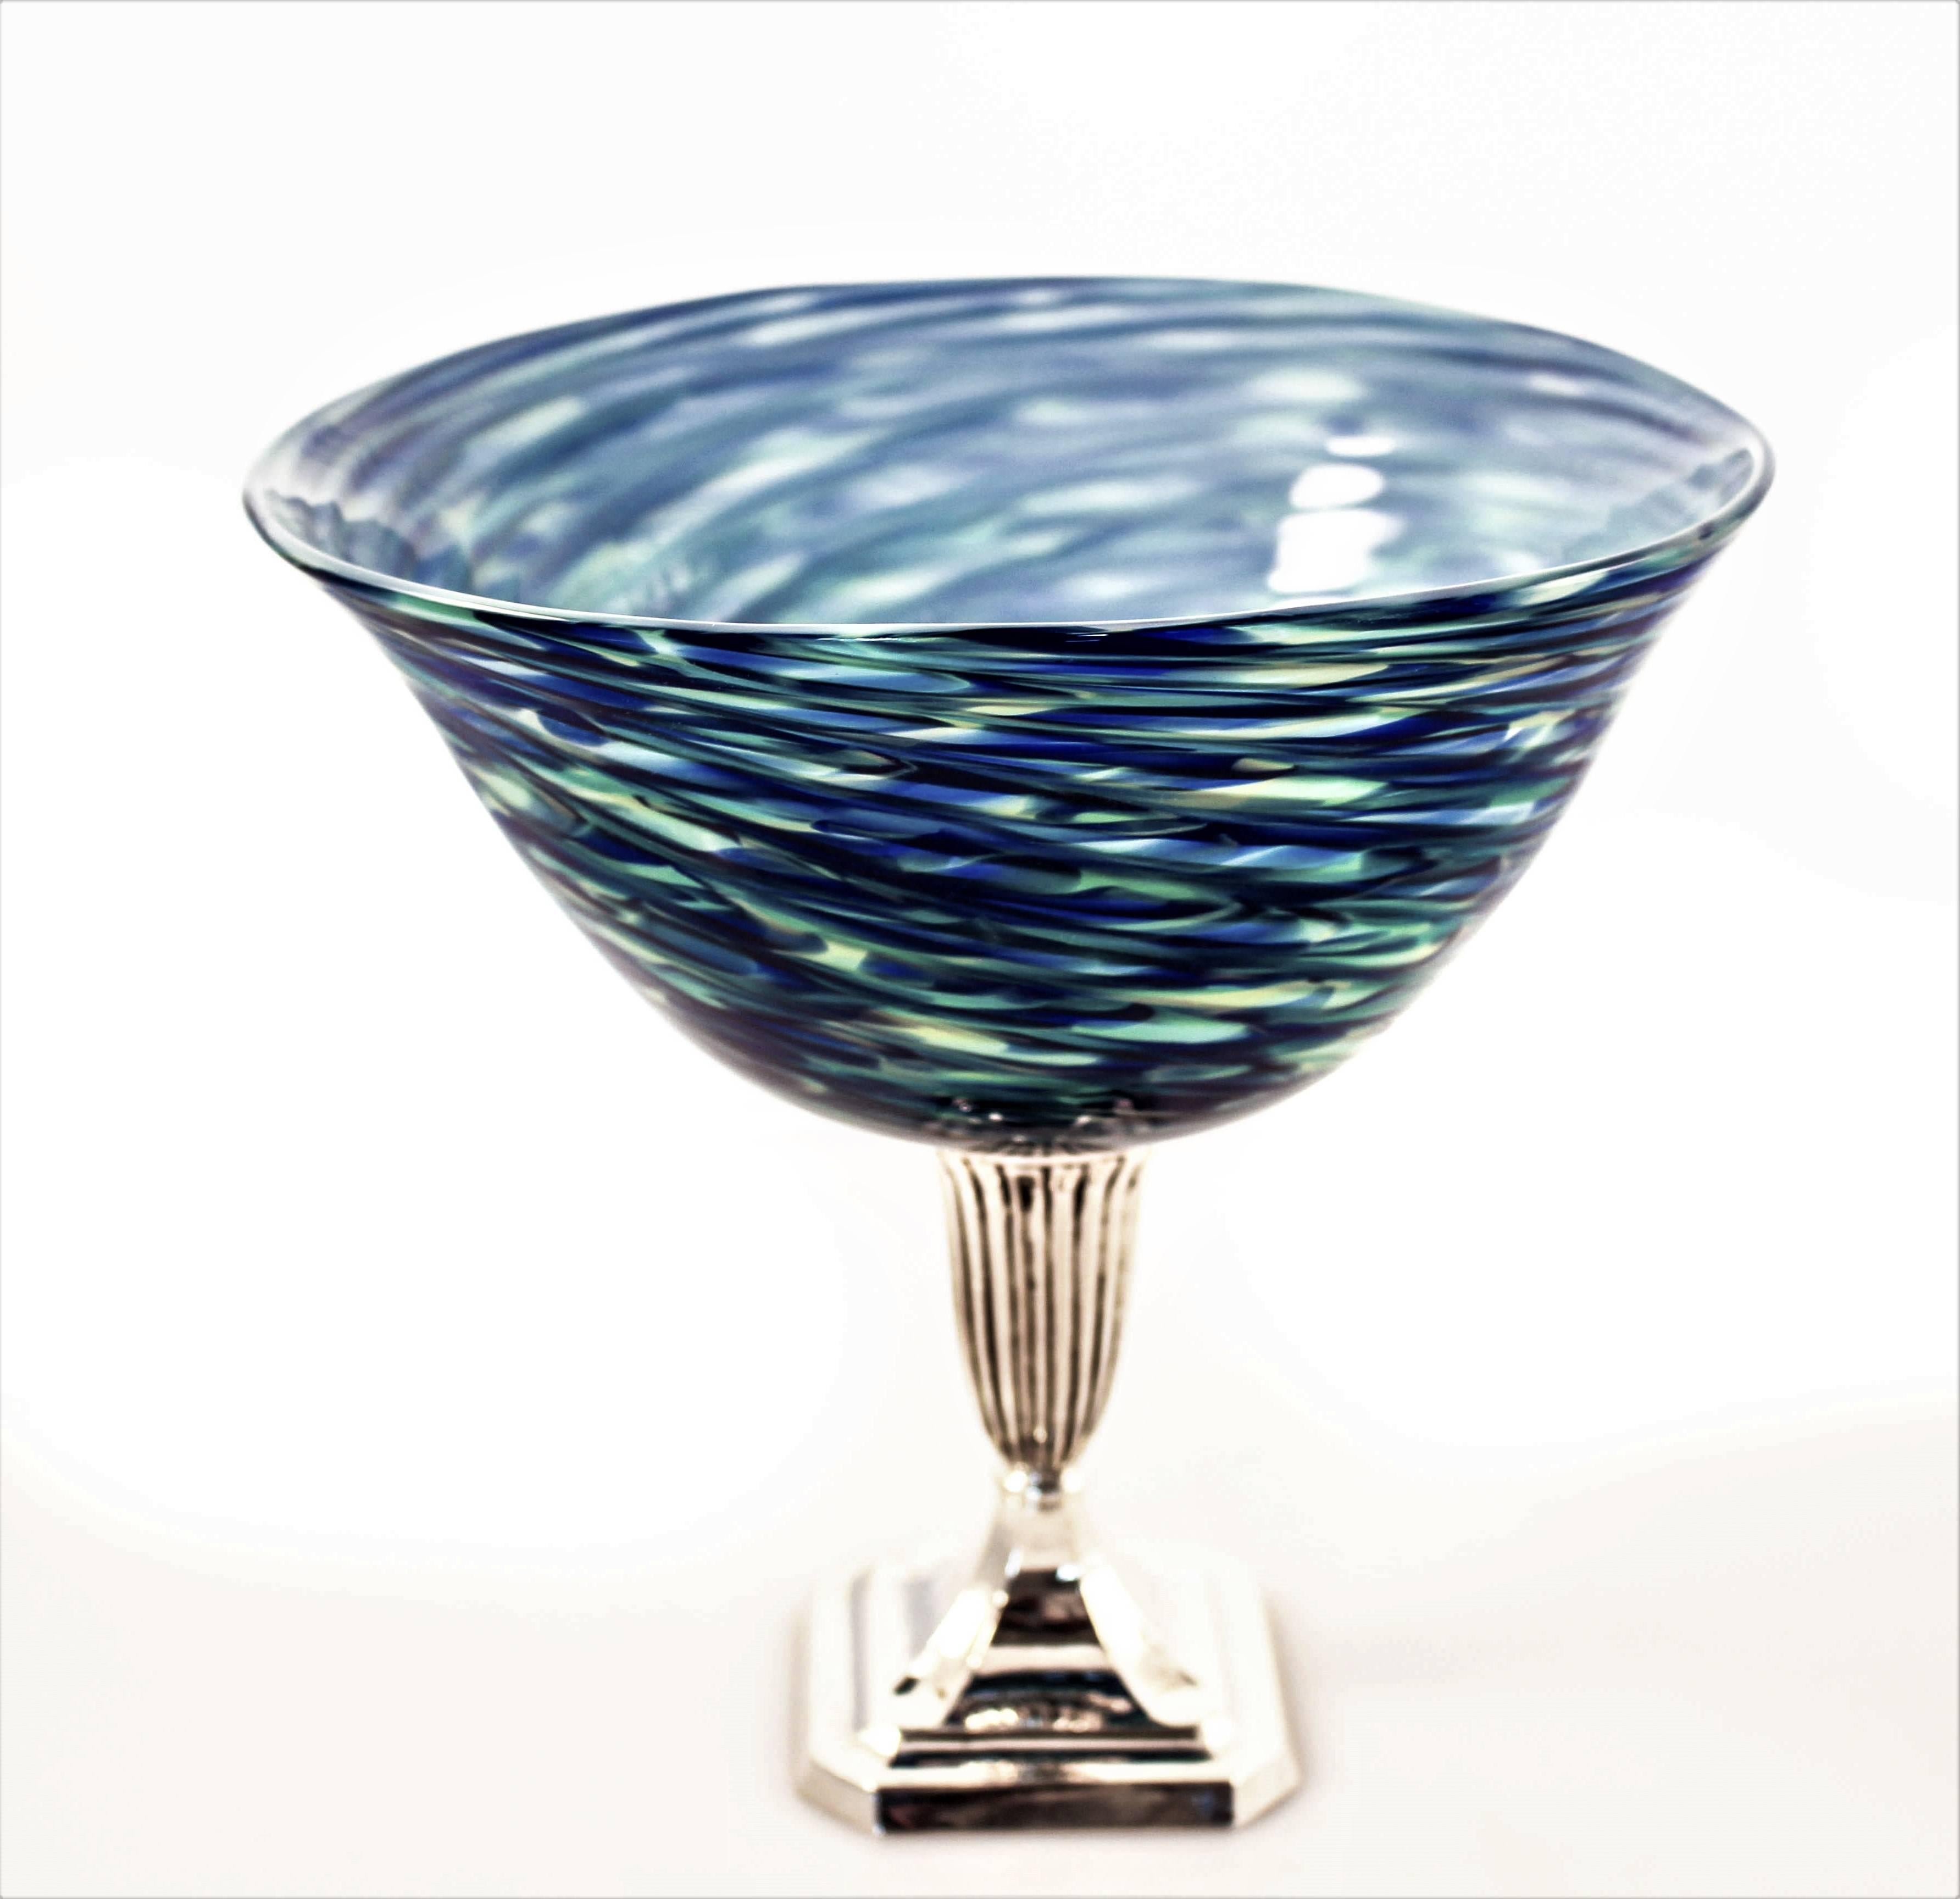 Different shades of blue, from light to dark with touches of pale yellow blend together in the glass like waves in an ocean. Sitting proudly on a sterling pedestal, this piece is great for practically anything you want to put inside. Or, leave it on